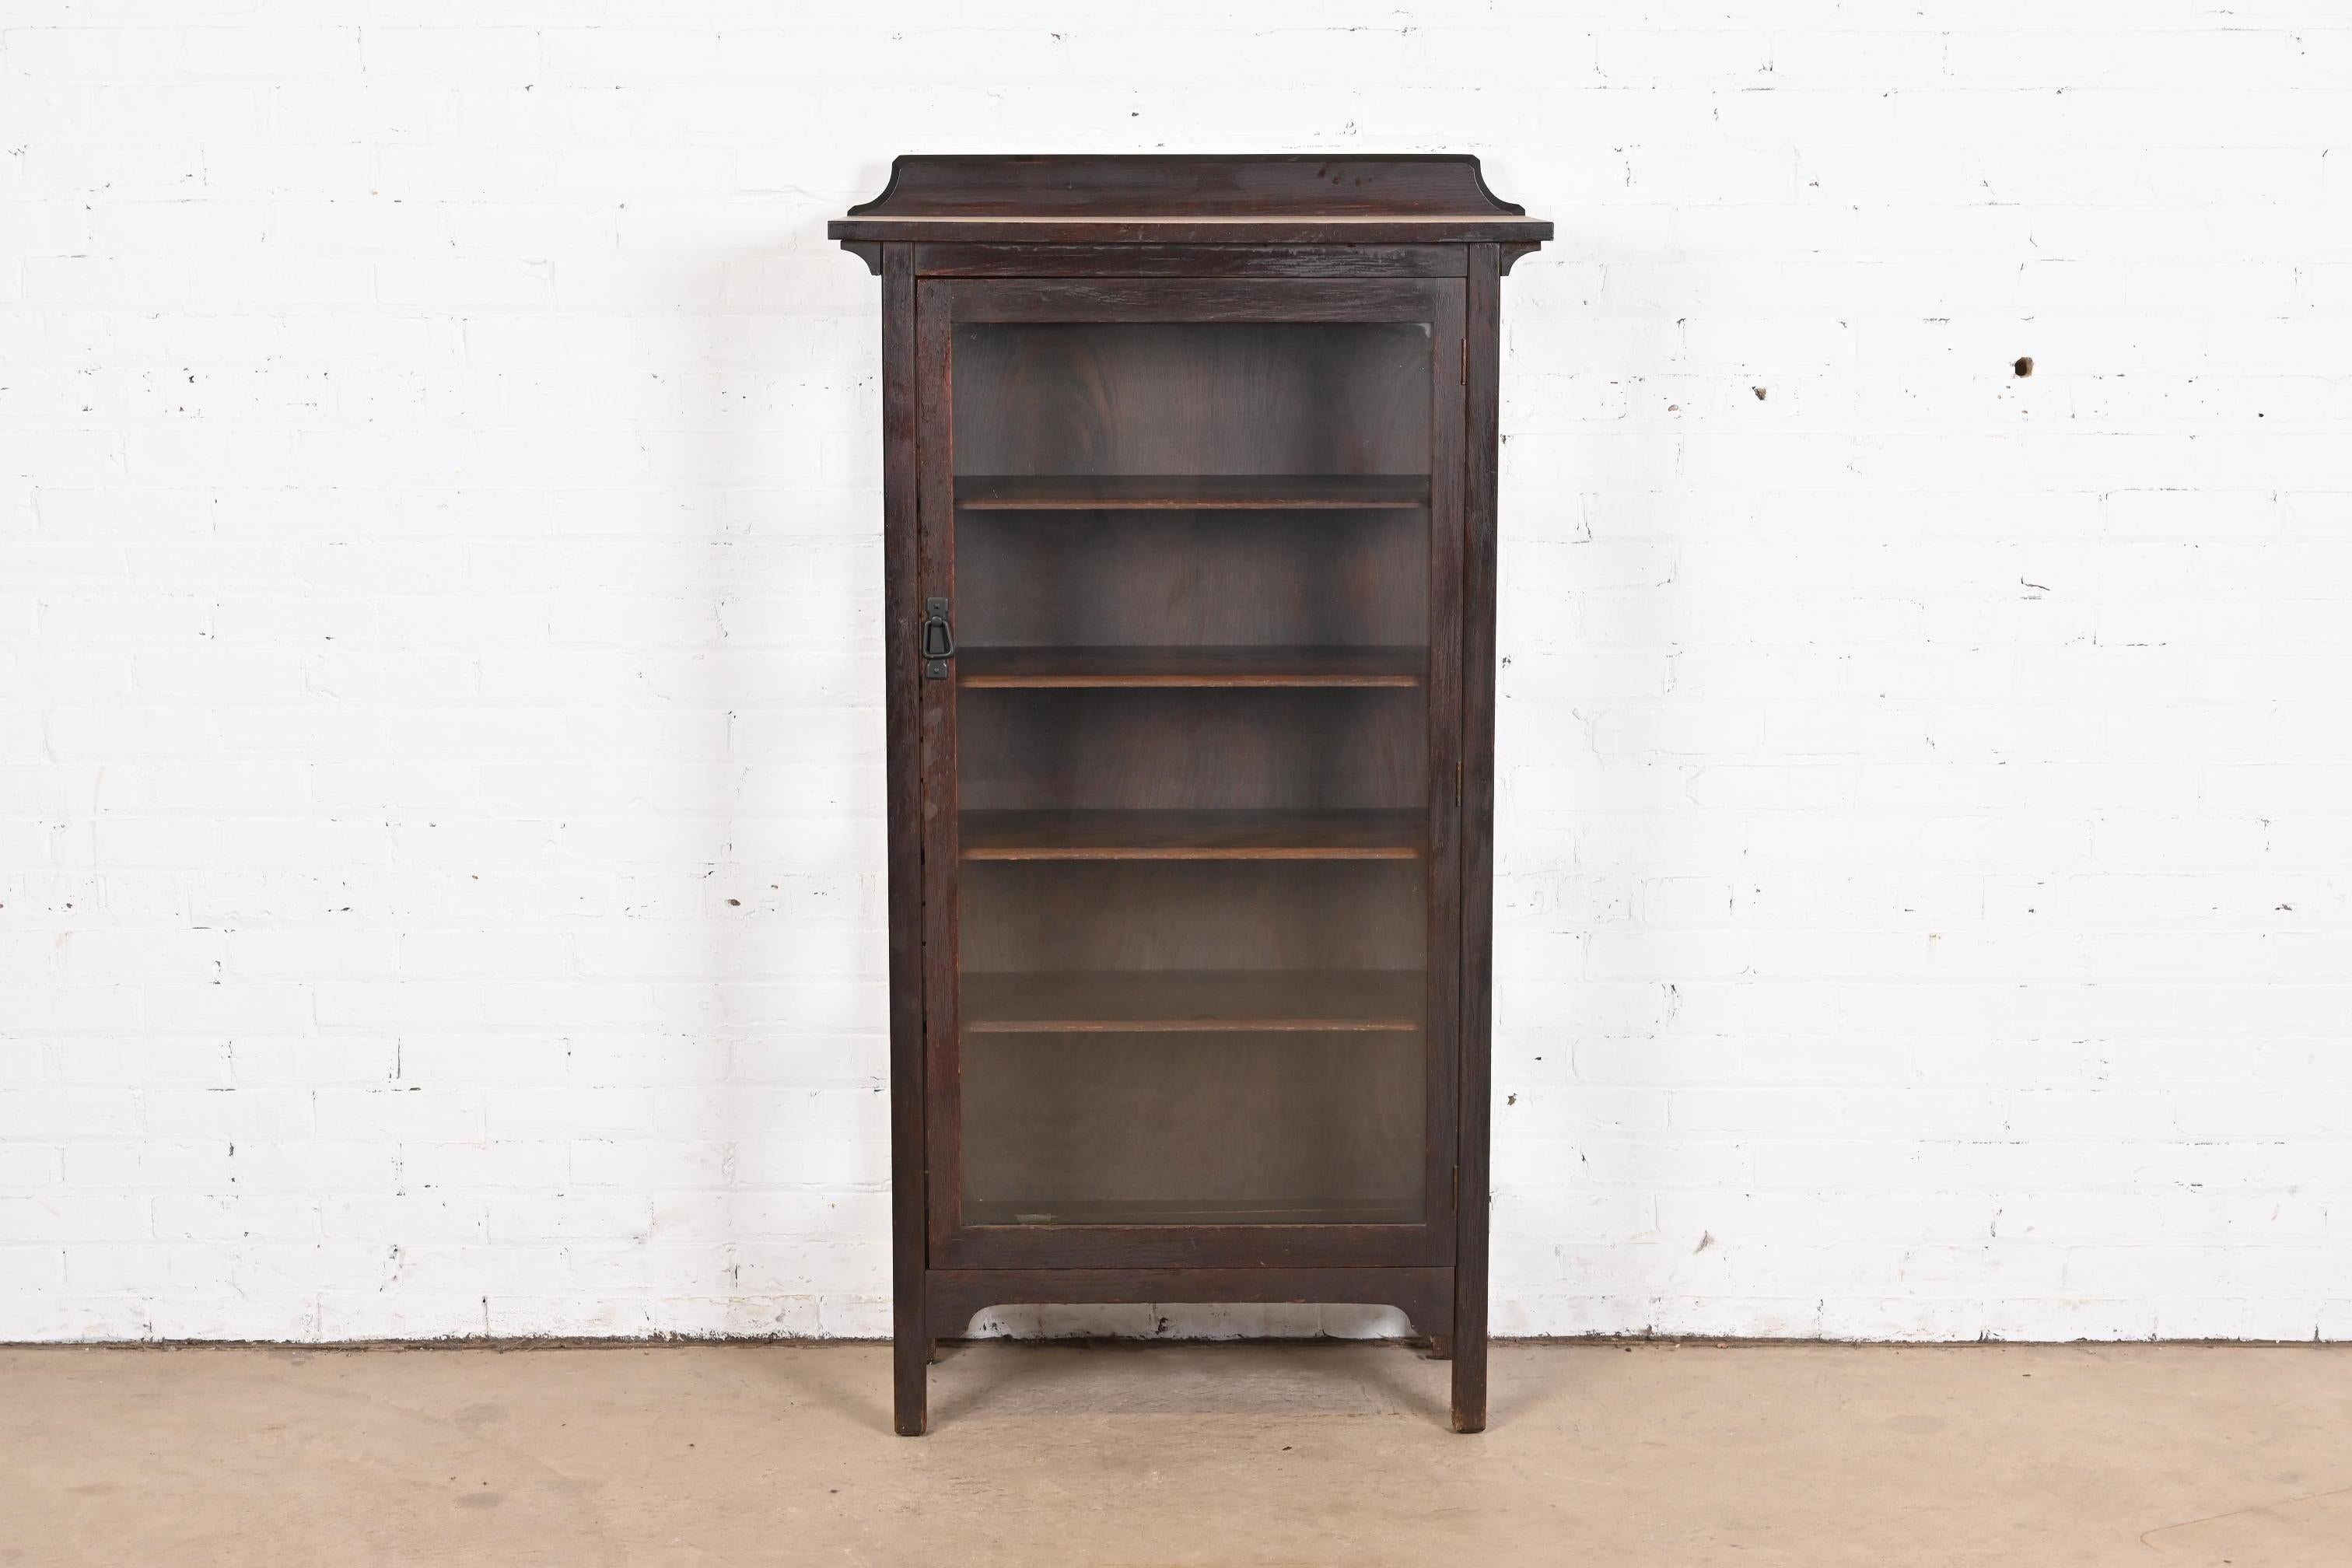 A gorgeous antique Mission or Arts & Crafts bookcase or display cabinet

In the manner of Stickley Brothers

By New England Furniture Co. of Grand Rapids

USA, Circa 1900

Oak, with glass front door and sides, and adjustable interior